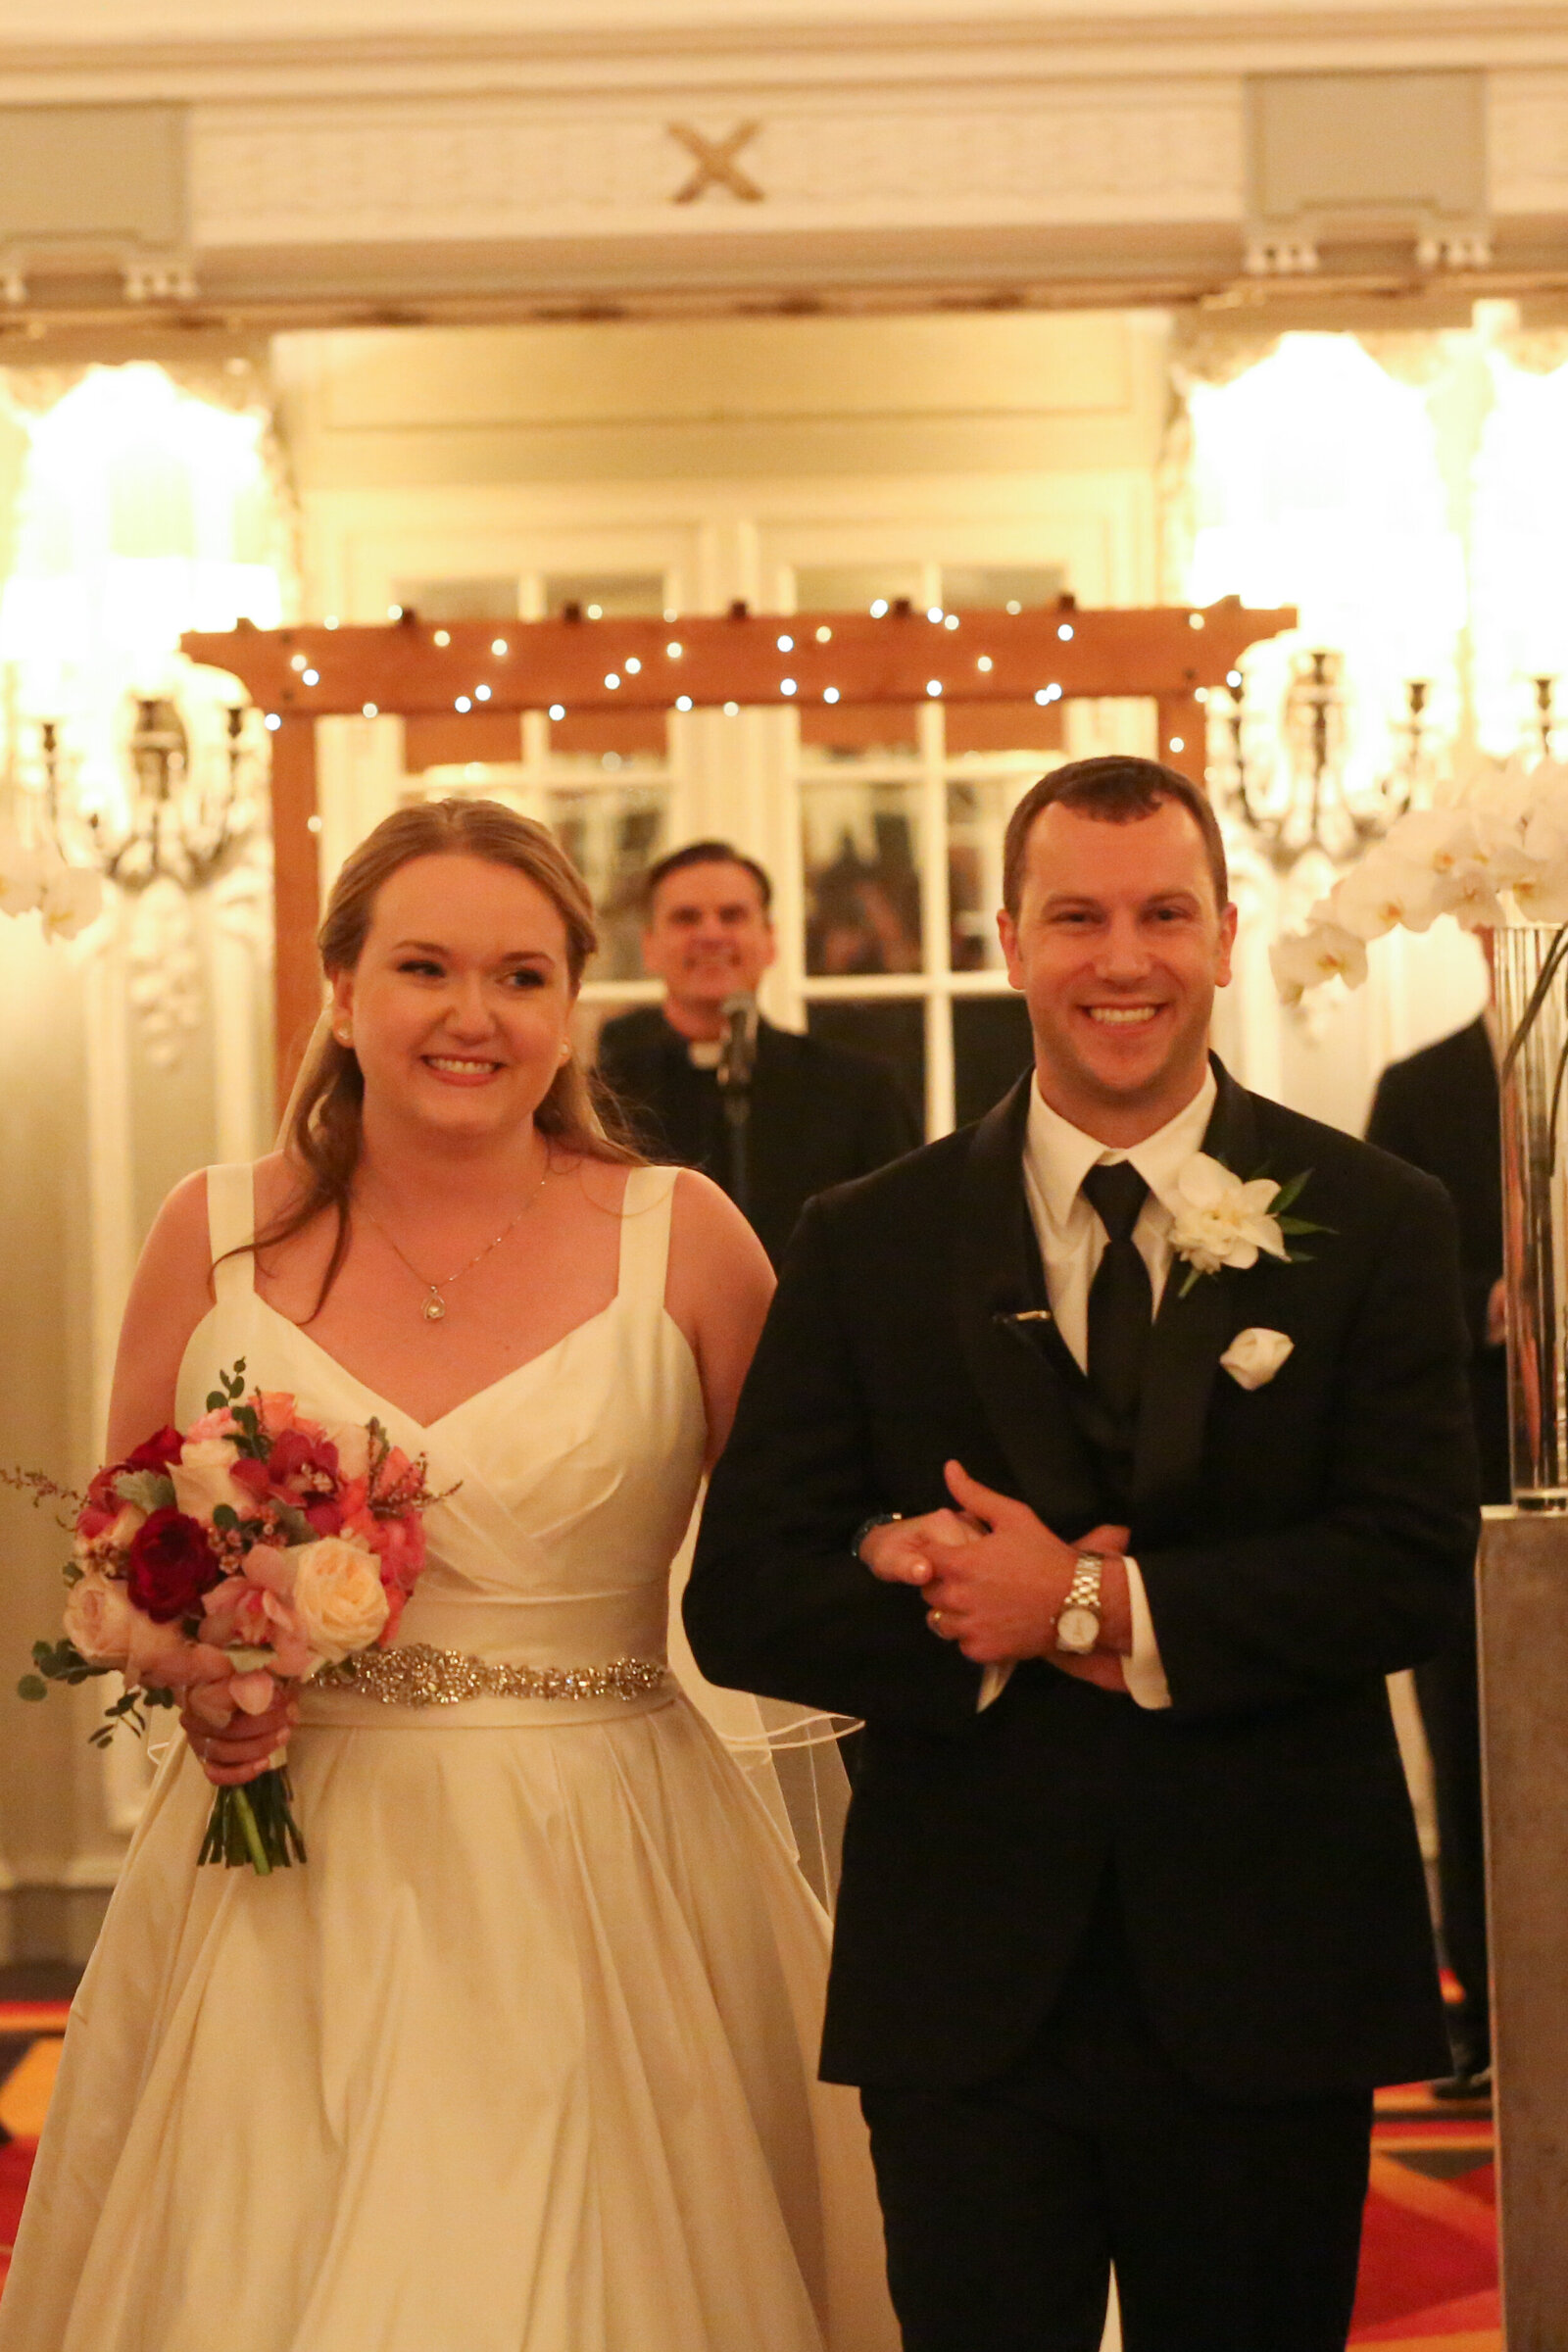 Bride and groom smile as they walk back down the aisle as a married couple arm in arm